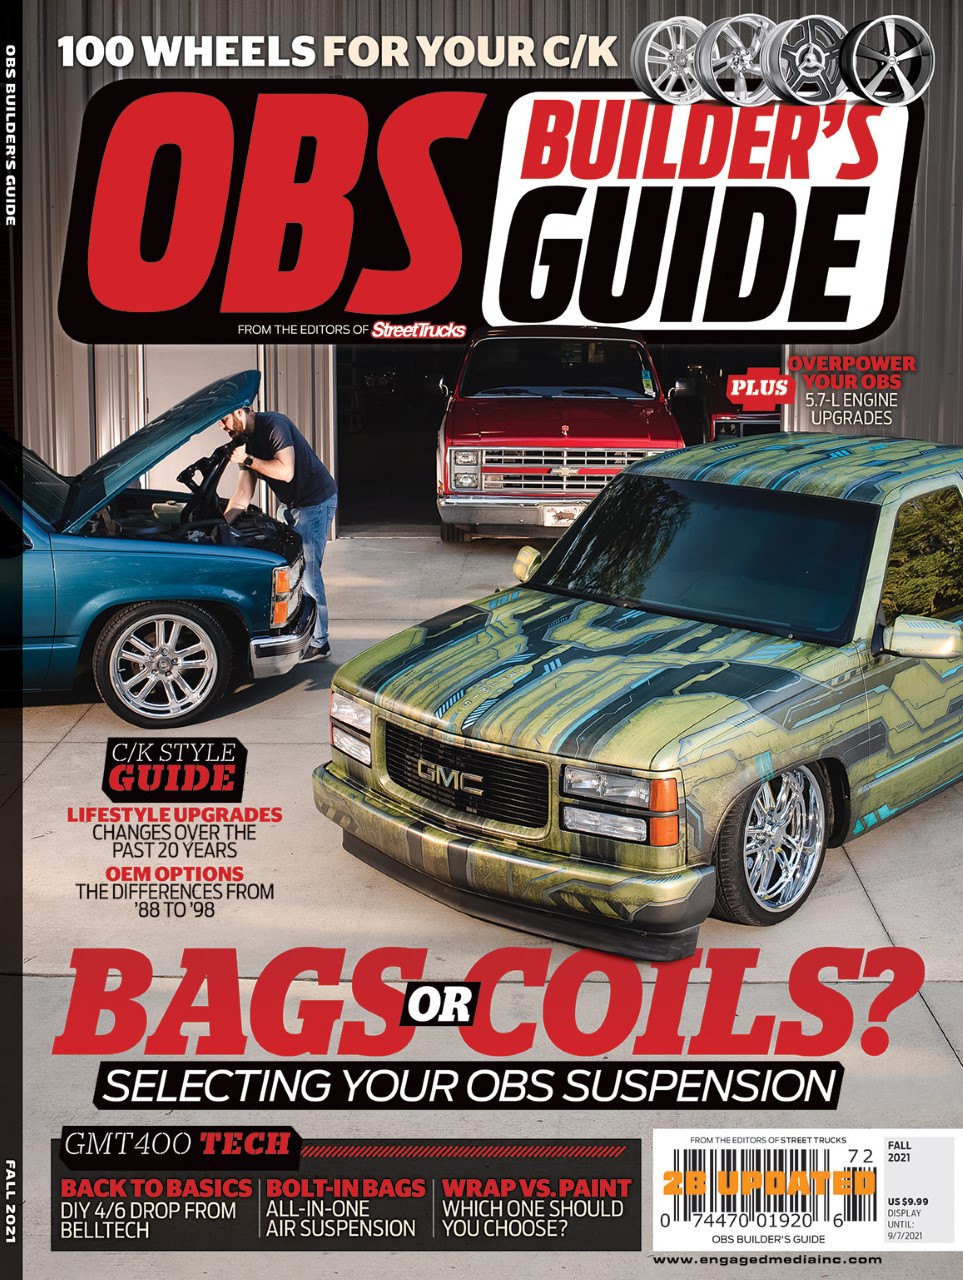 OBS Builders Guide Volume 2 Cover Reveal! Preorder Now!